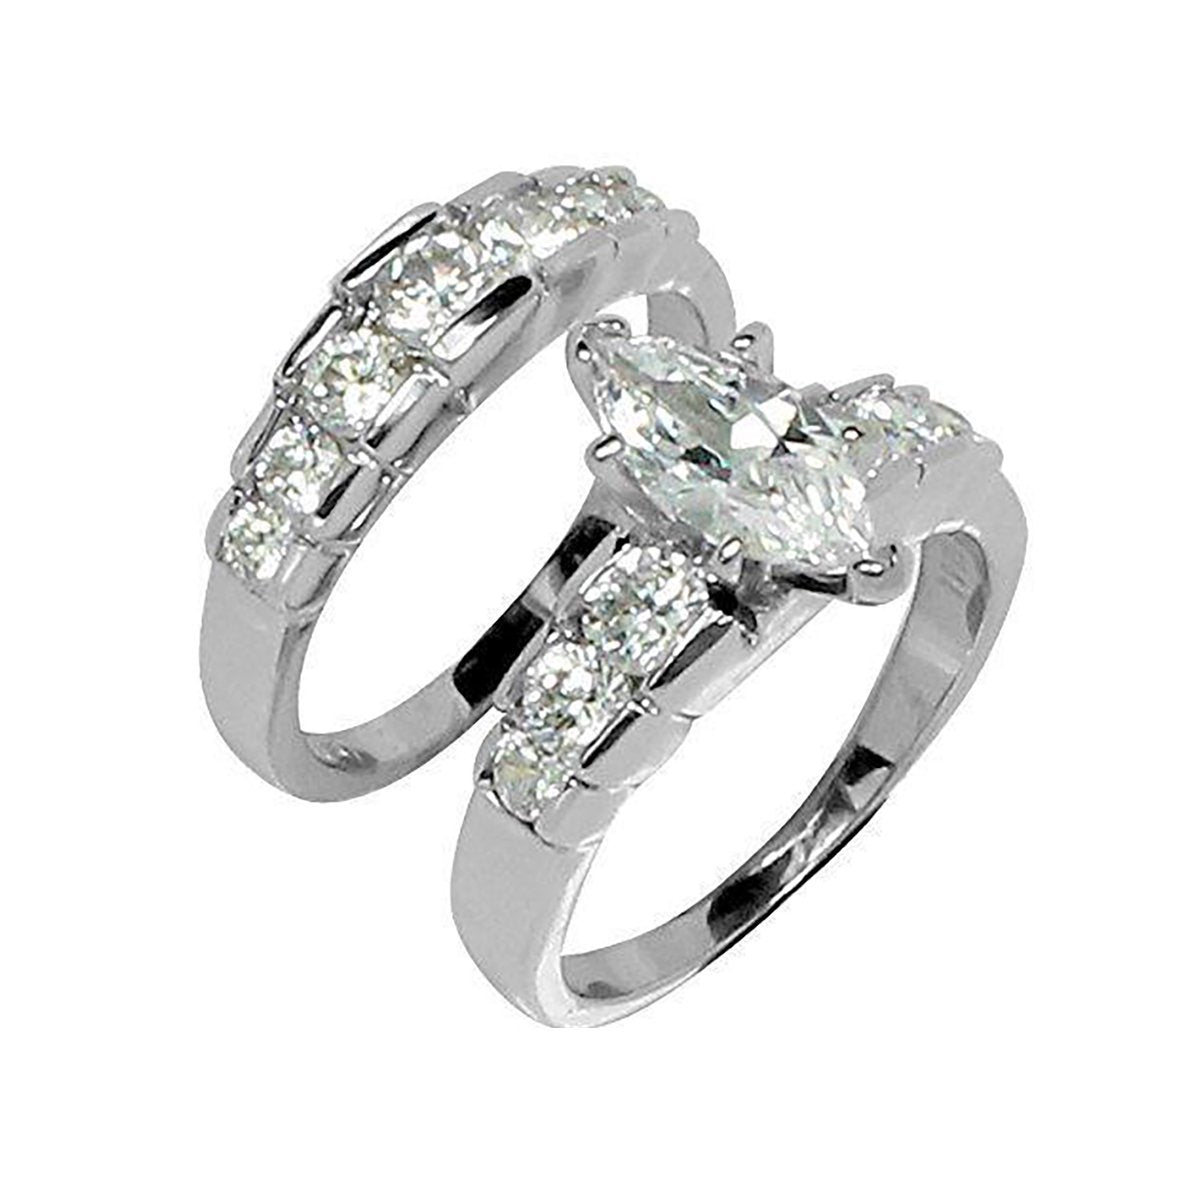 Stainless Steel Marquis Cut CZ Wedding Set with Graduated Stones and Channel-Set Band - Rings - Bijou Her -  -  - 